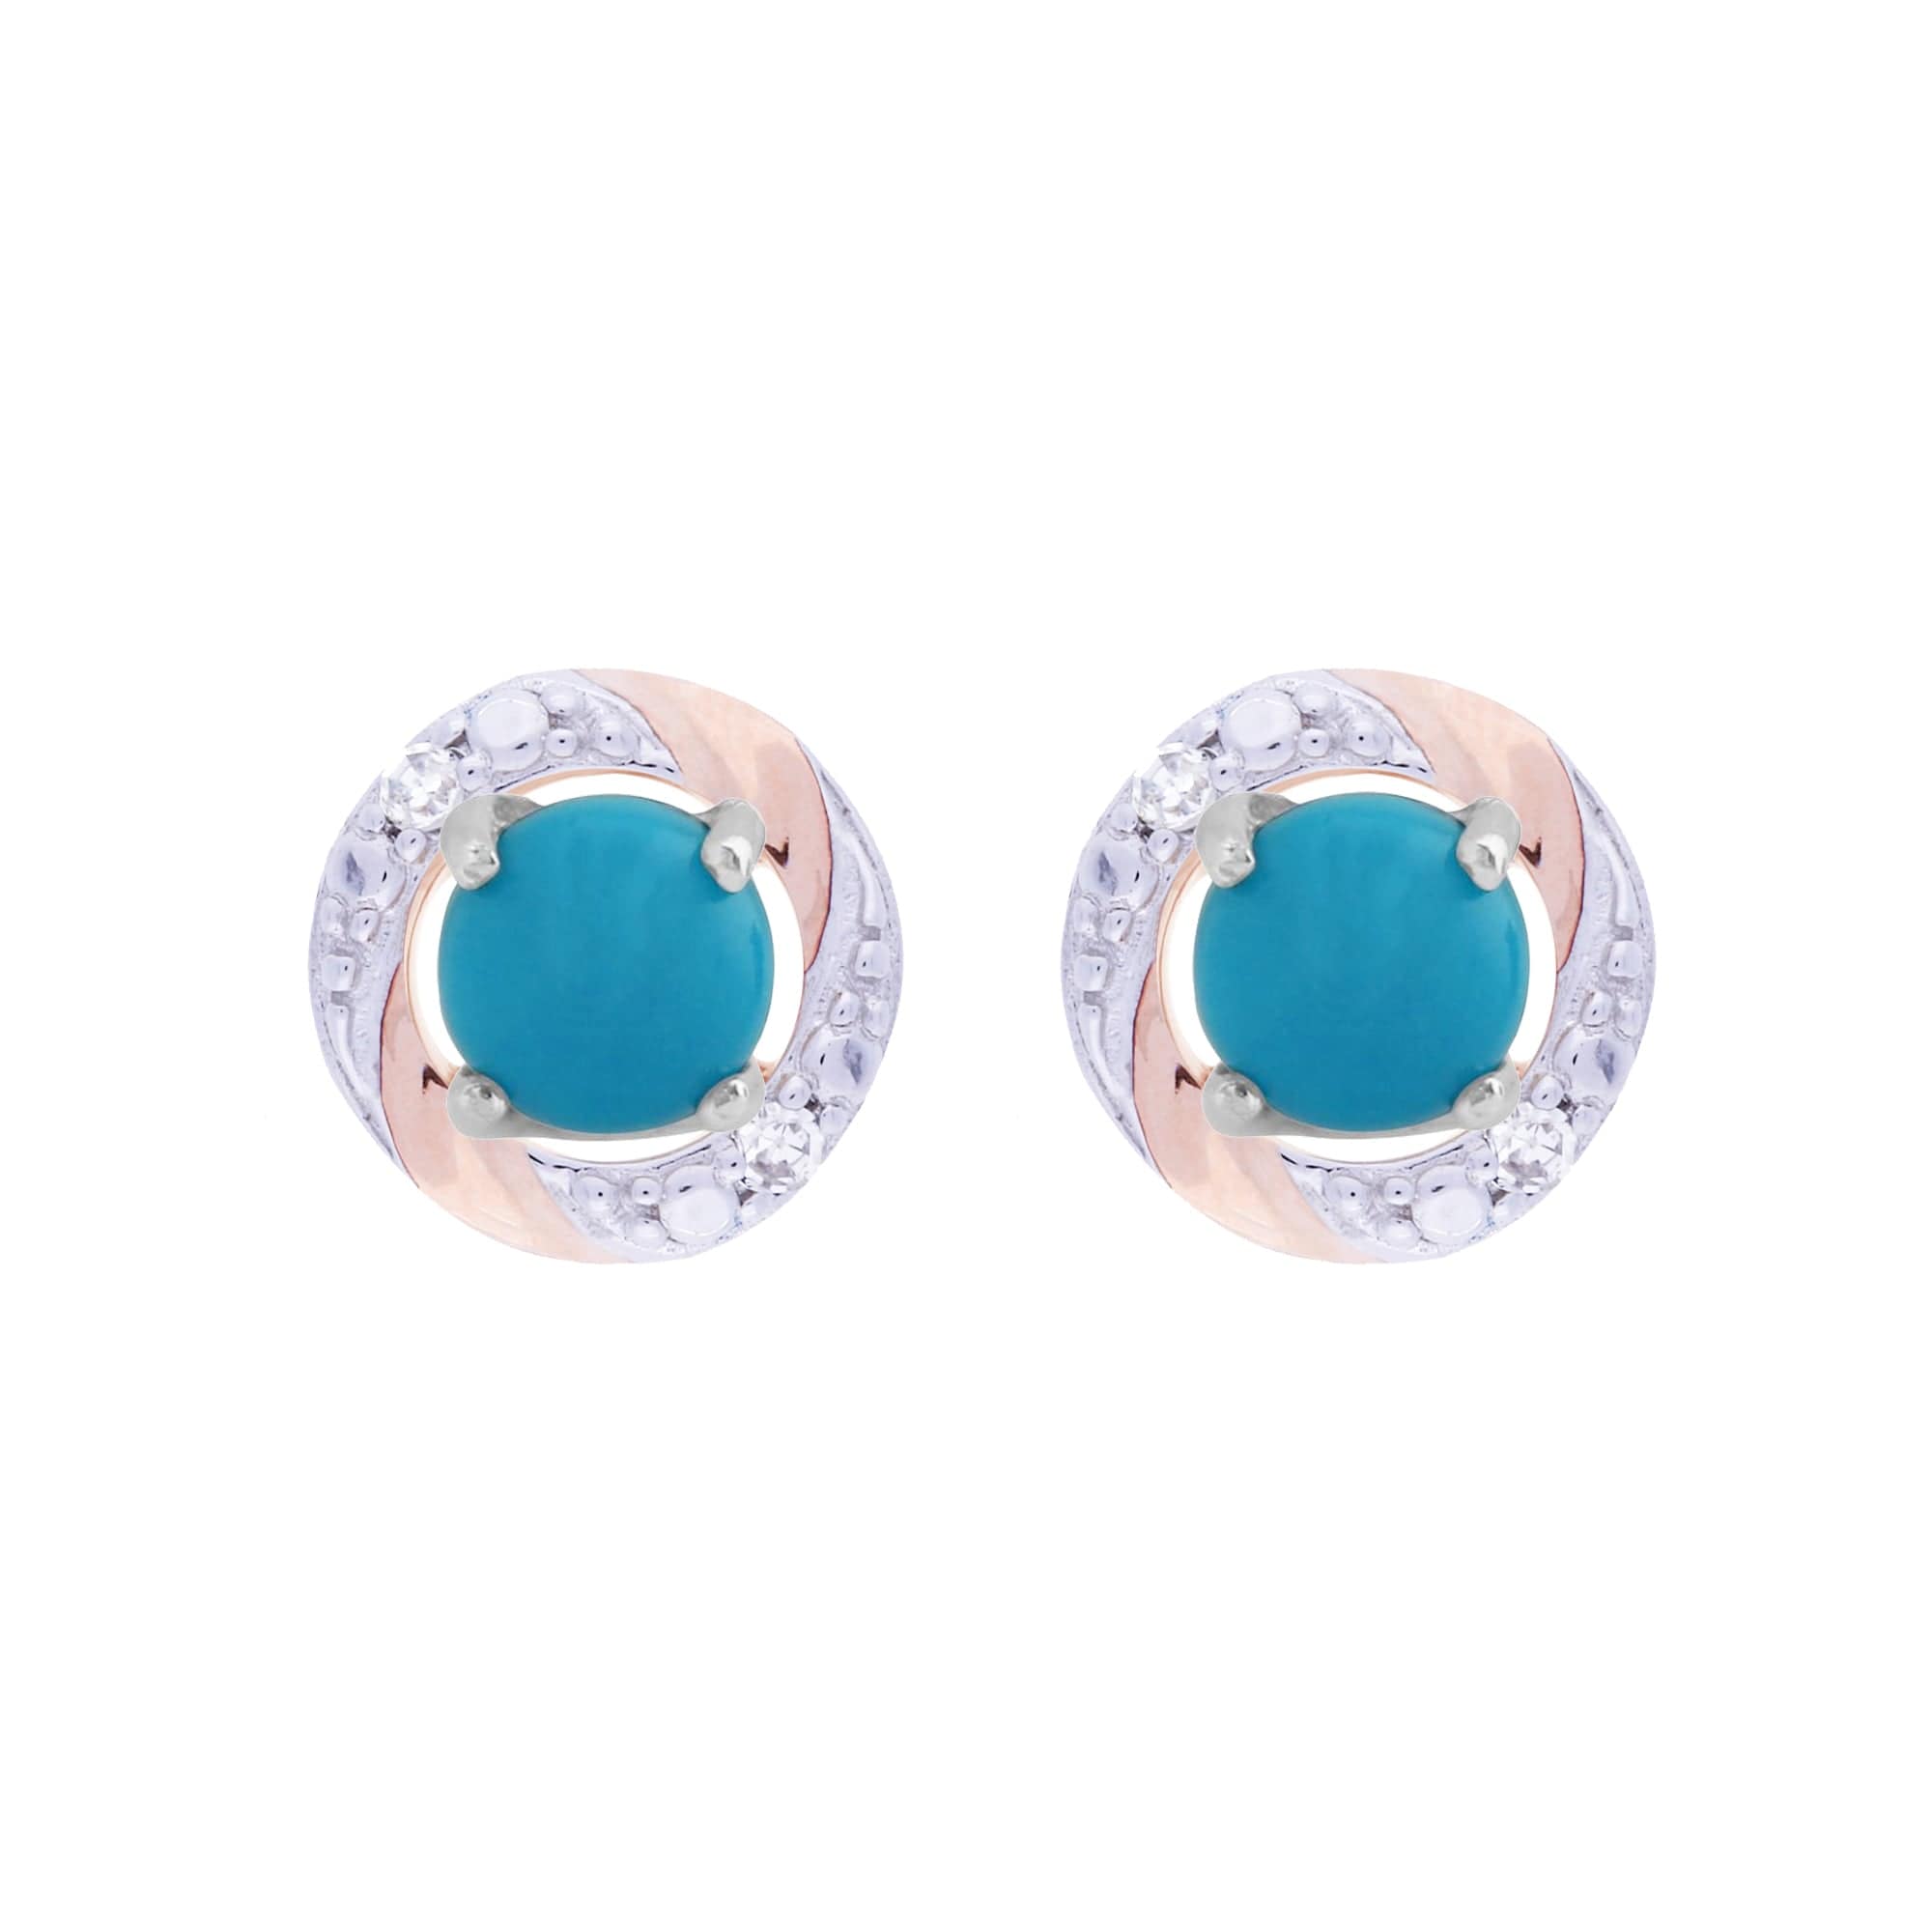 162E0071219-191E0378019 Classic Round Turquoise Stud Earrings with Detachable Diamond Round Earrings Jacket Set in 9ct White Gold 1